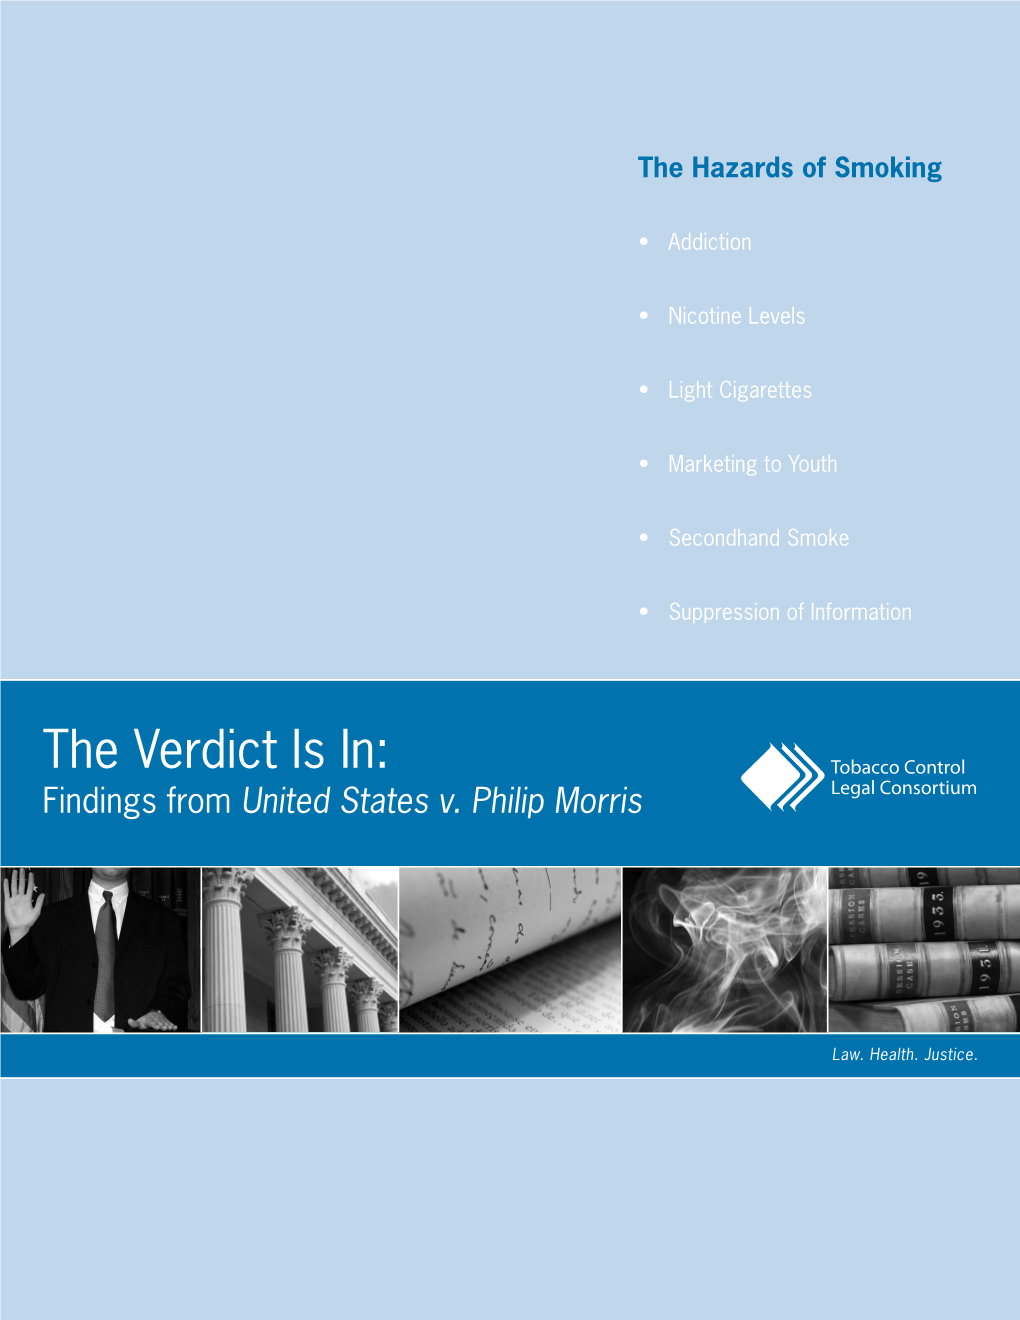 The Verdict Is In: Tobacco Control Legal Consortium Findings from United States V